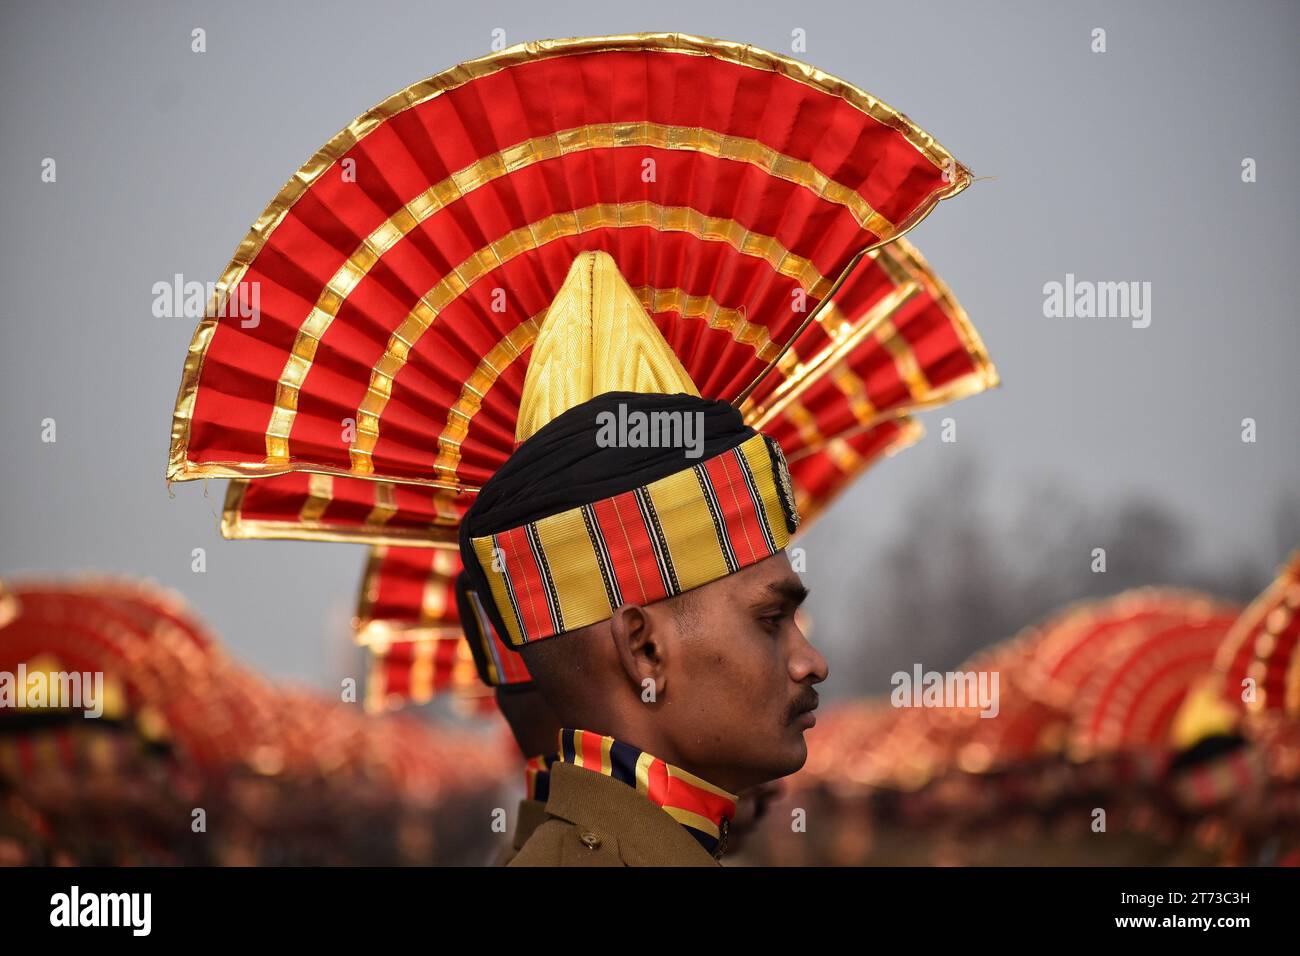 November 09,2023, Srinagar Kashmir, India : New recruits of the Indian Border Security Force (BSF) take part during a passing out parade in Humhama, on the outskirts of Srinagar. A total of 599 recruits were formally inducted into the BSF, an Indian paramilitary force, after completing 44 weeks of training in physical fitness, weapon handling, commando operations and counter insurgency, a BSF spokesman said. On November 09,2023, Srinagar Kashmir, India. (Photo By Firdous Nazir/Eyepix Group/Sipa USA) Stock Photo